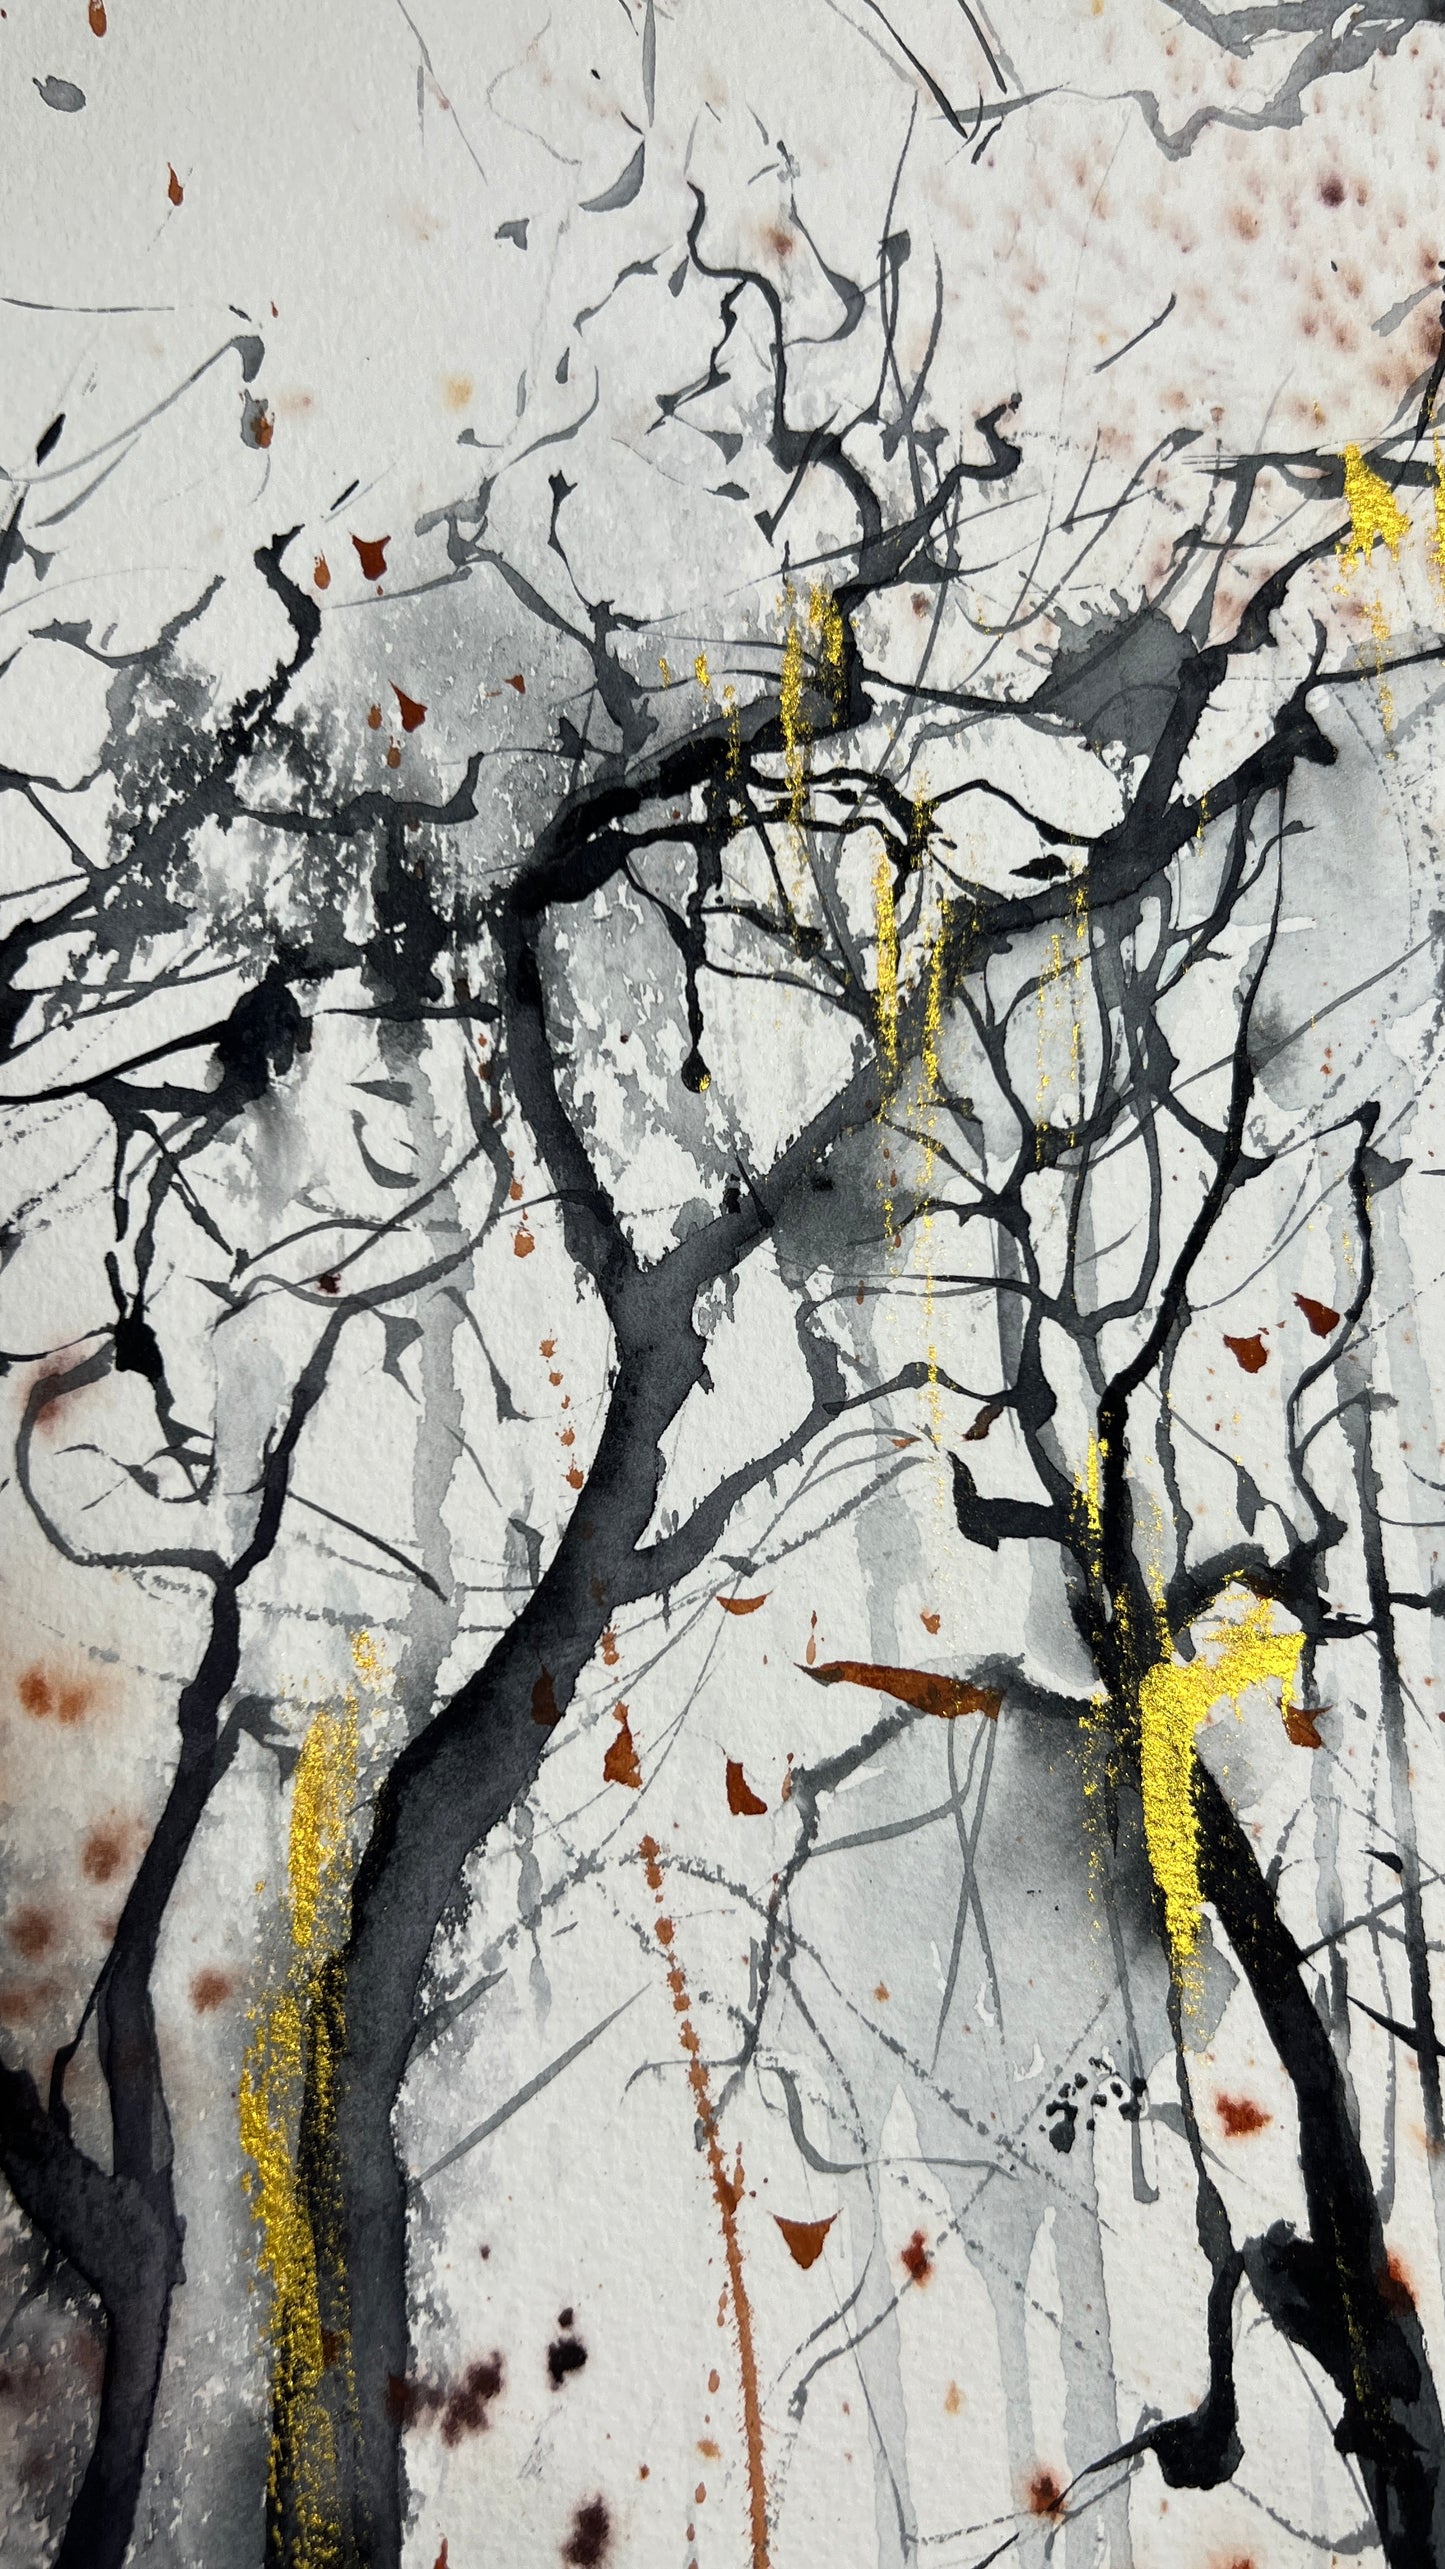 Abstract Tree Painting, Original Watercolor Artwork, Fall Forest, Modern Wall Art, Burnt Orange, Black, Unique Gift